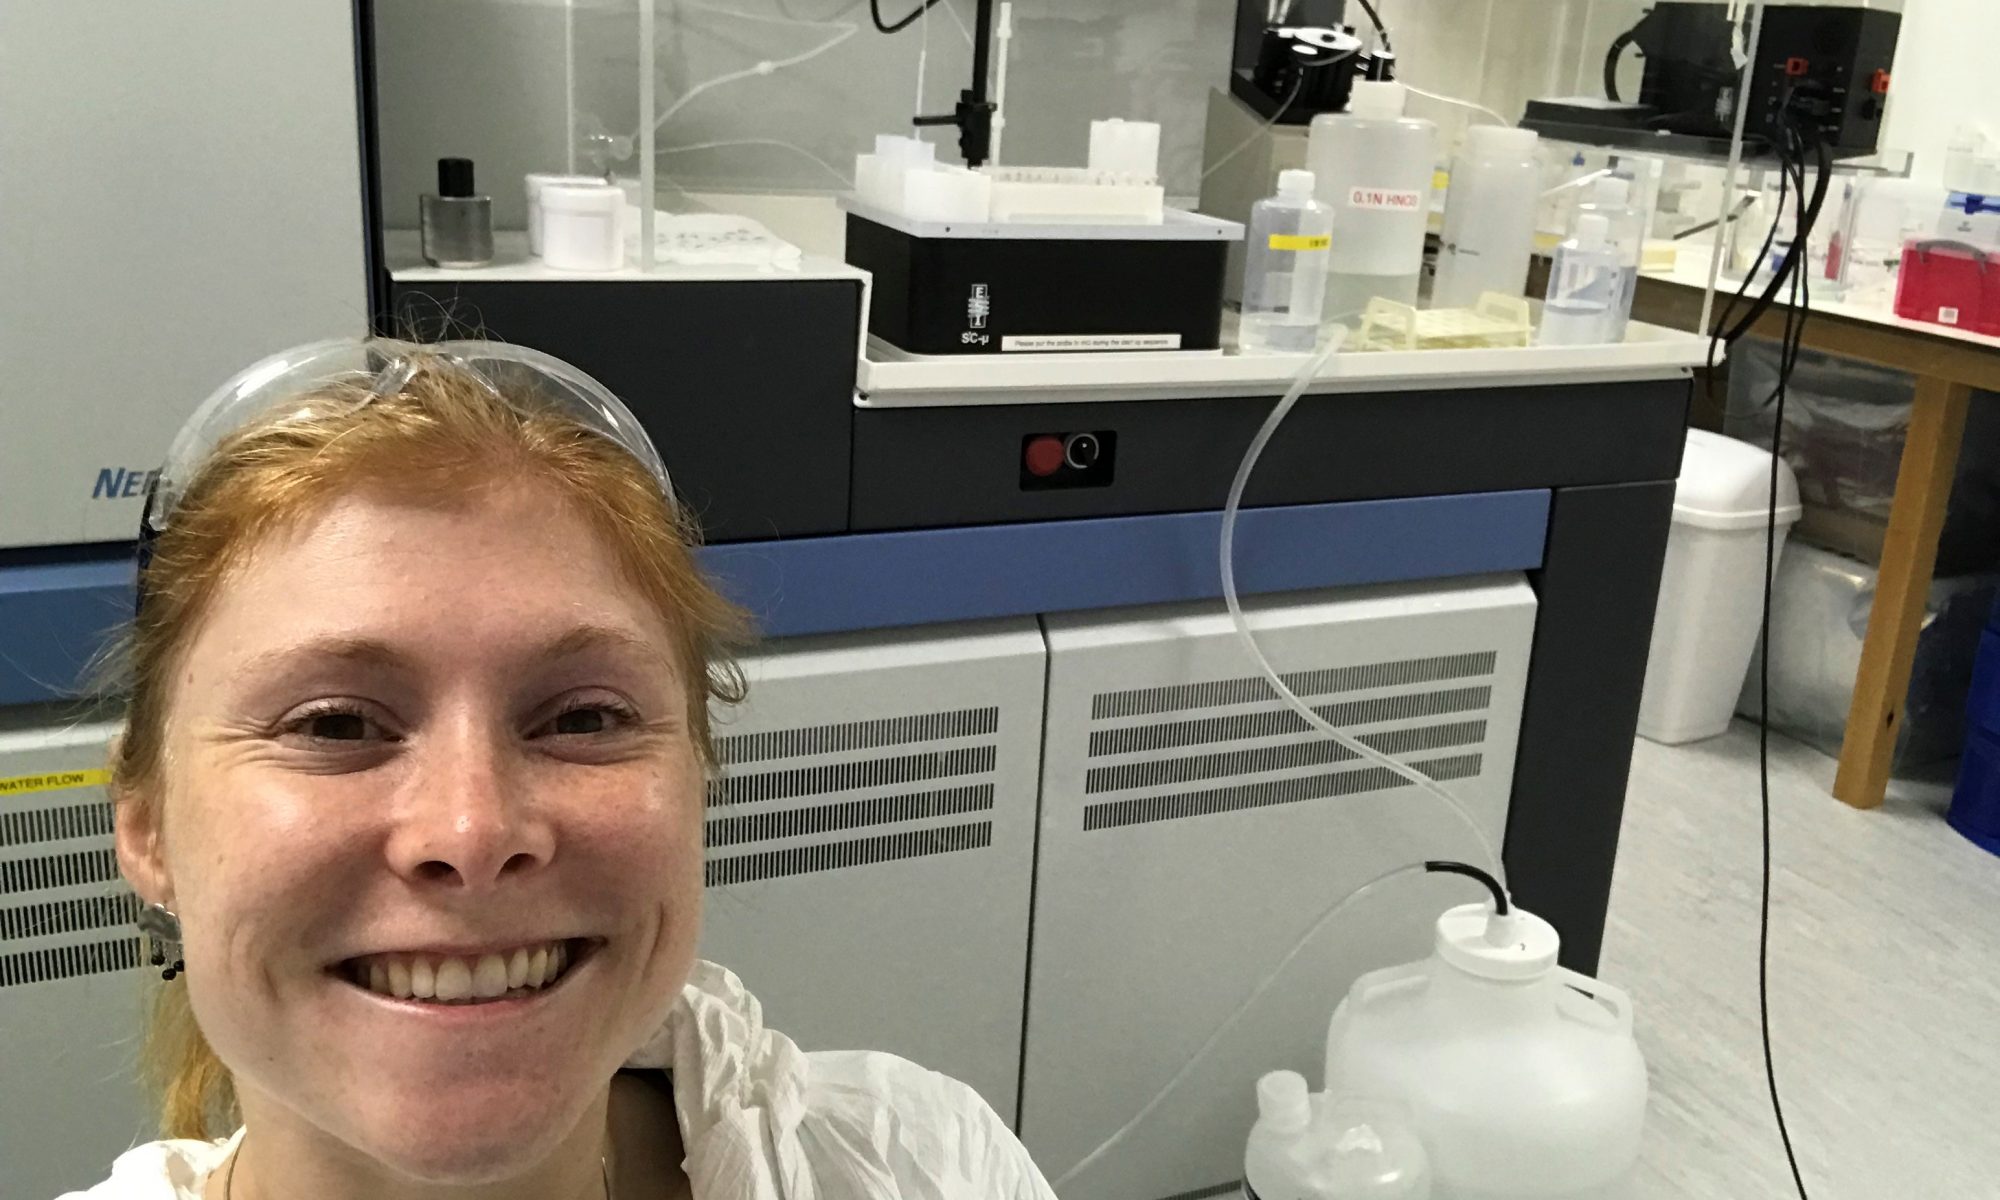 Carrie in the lab, wearing protective gear and stood in front of a mass spectrometer